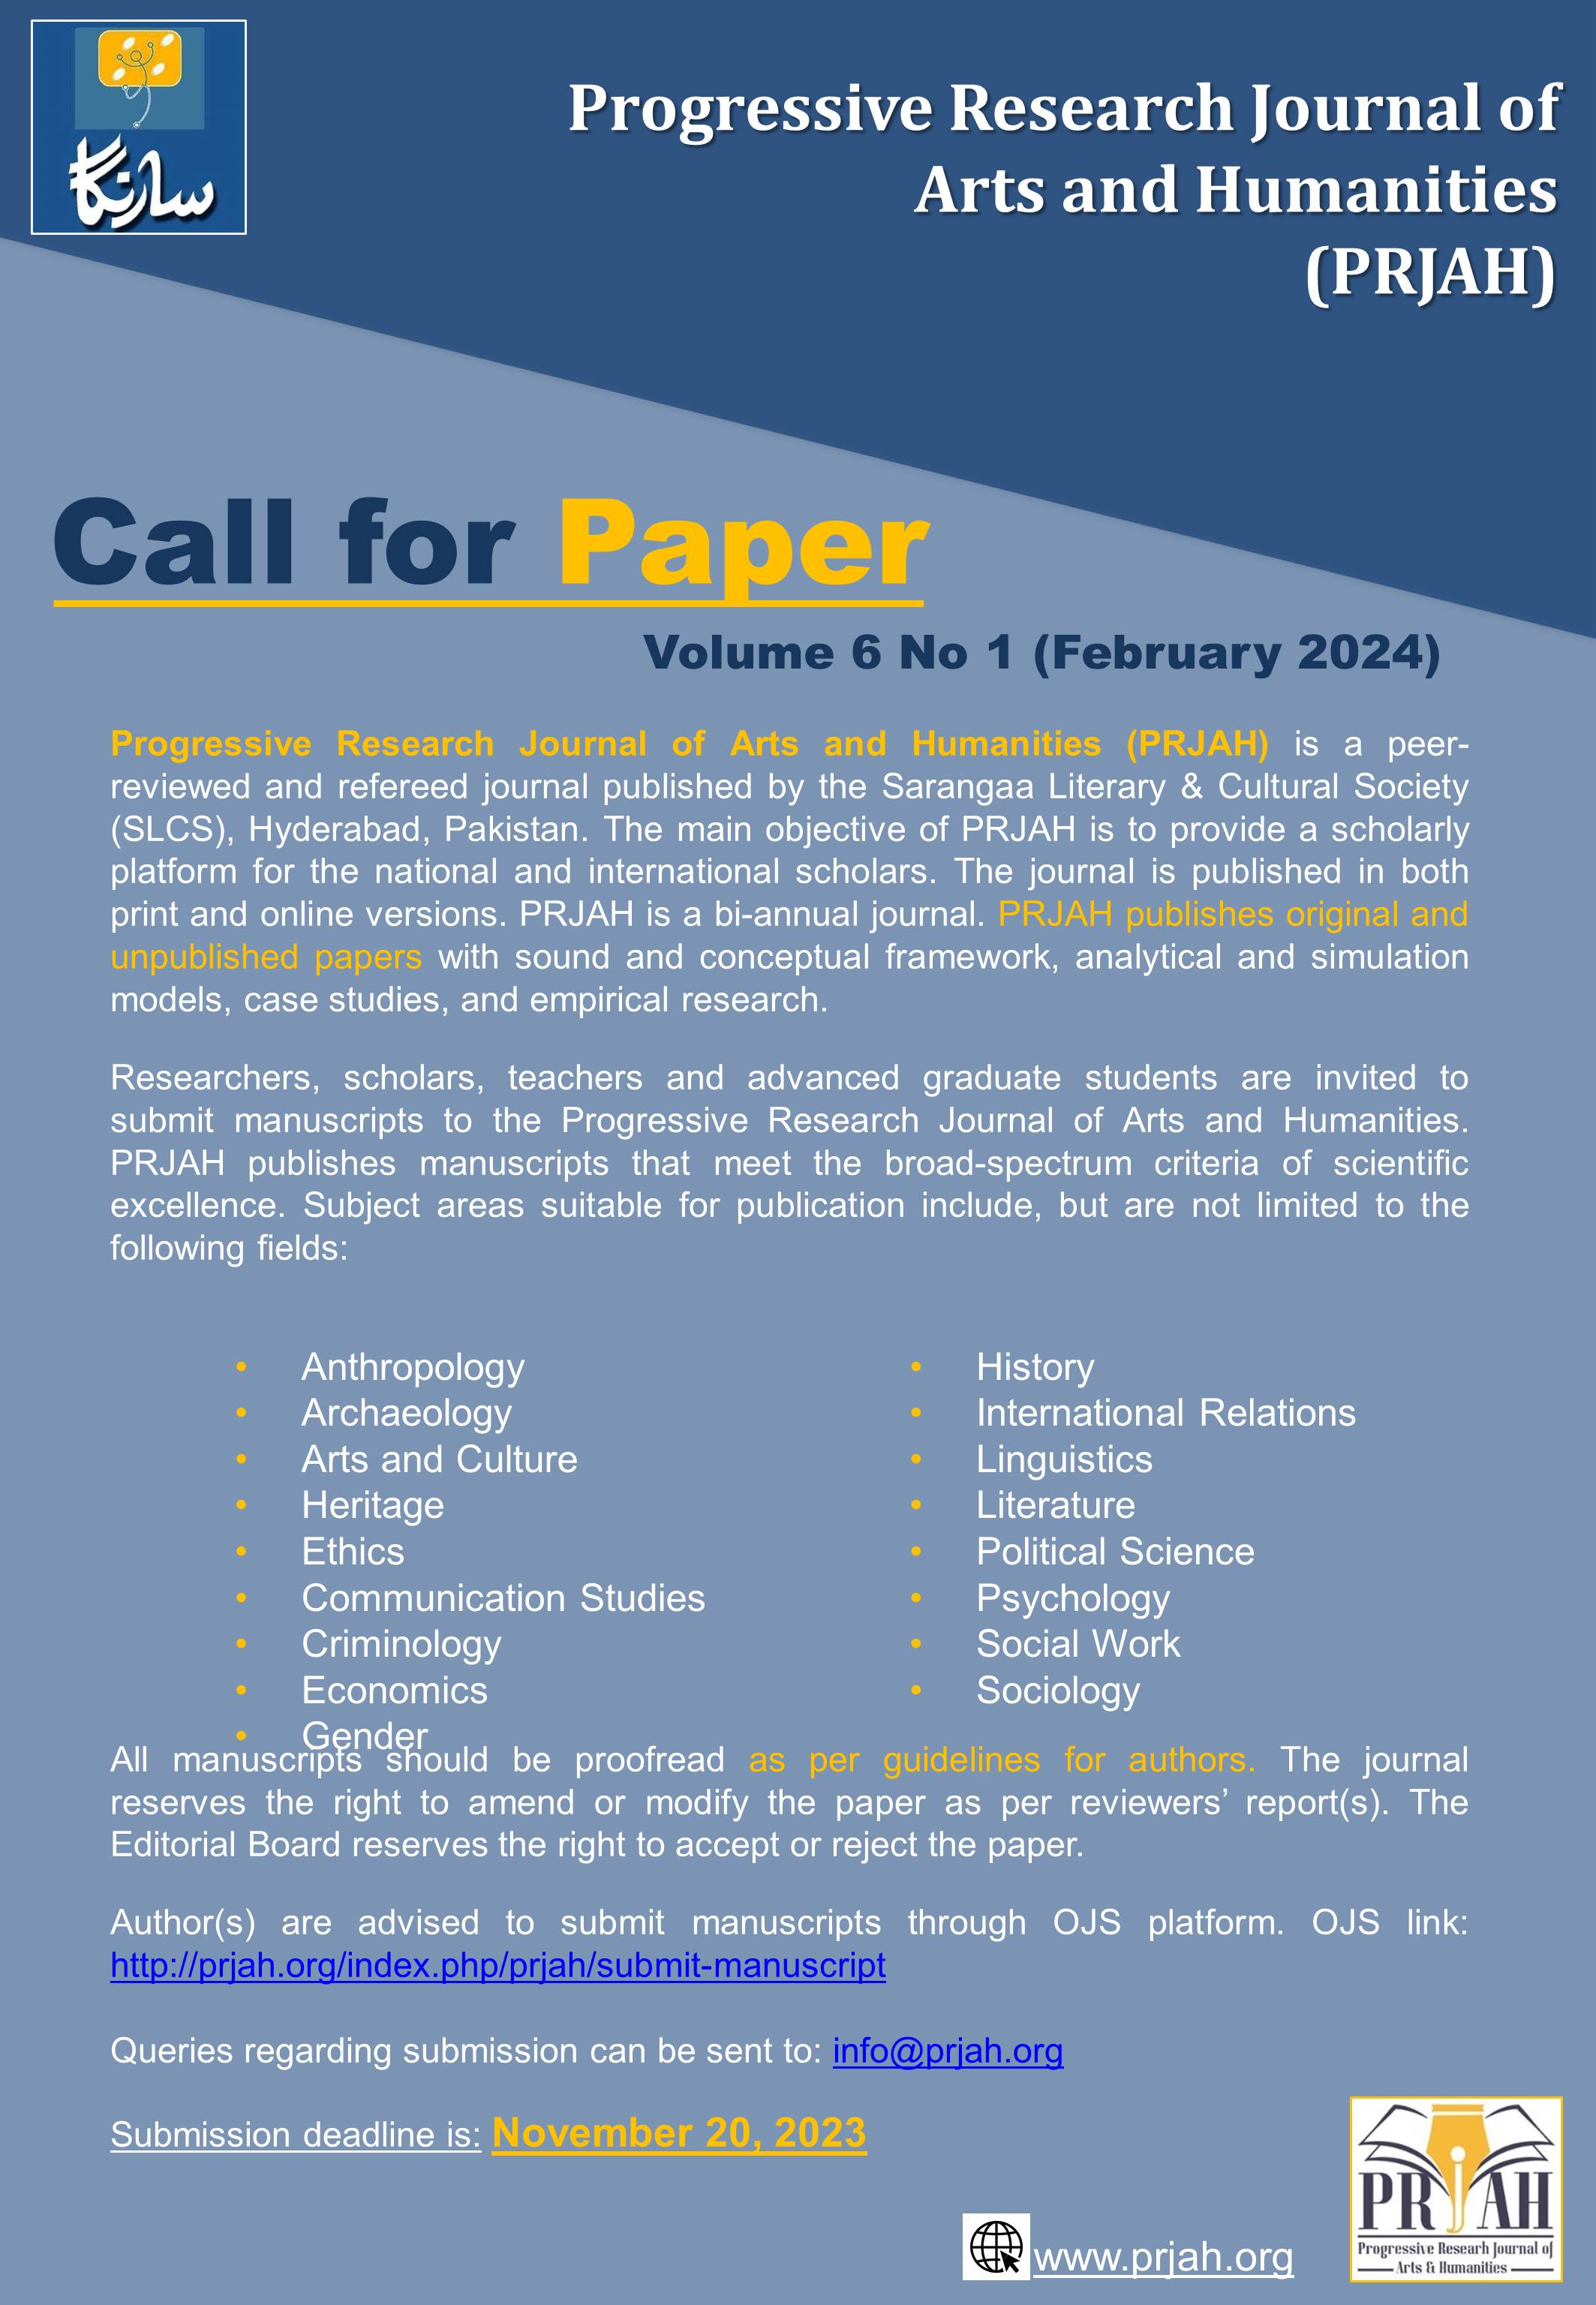 Call For Papers 